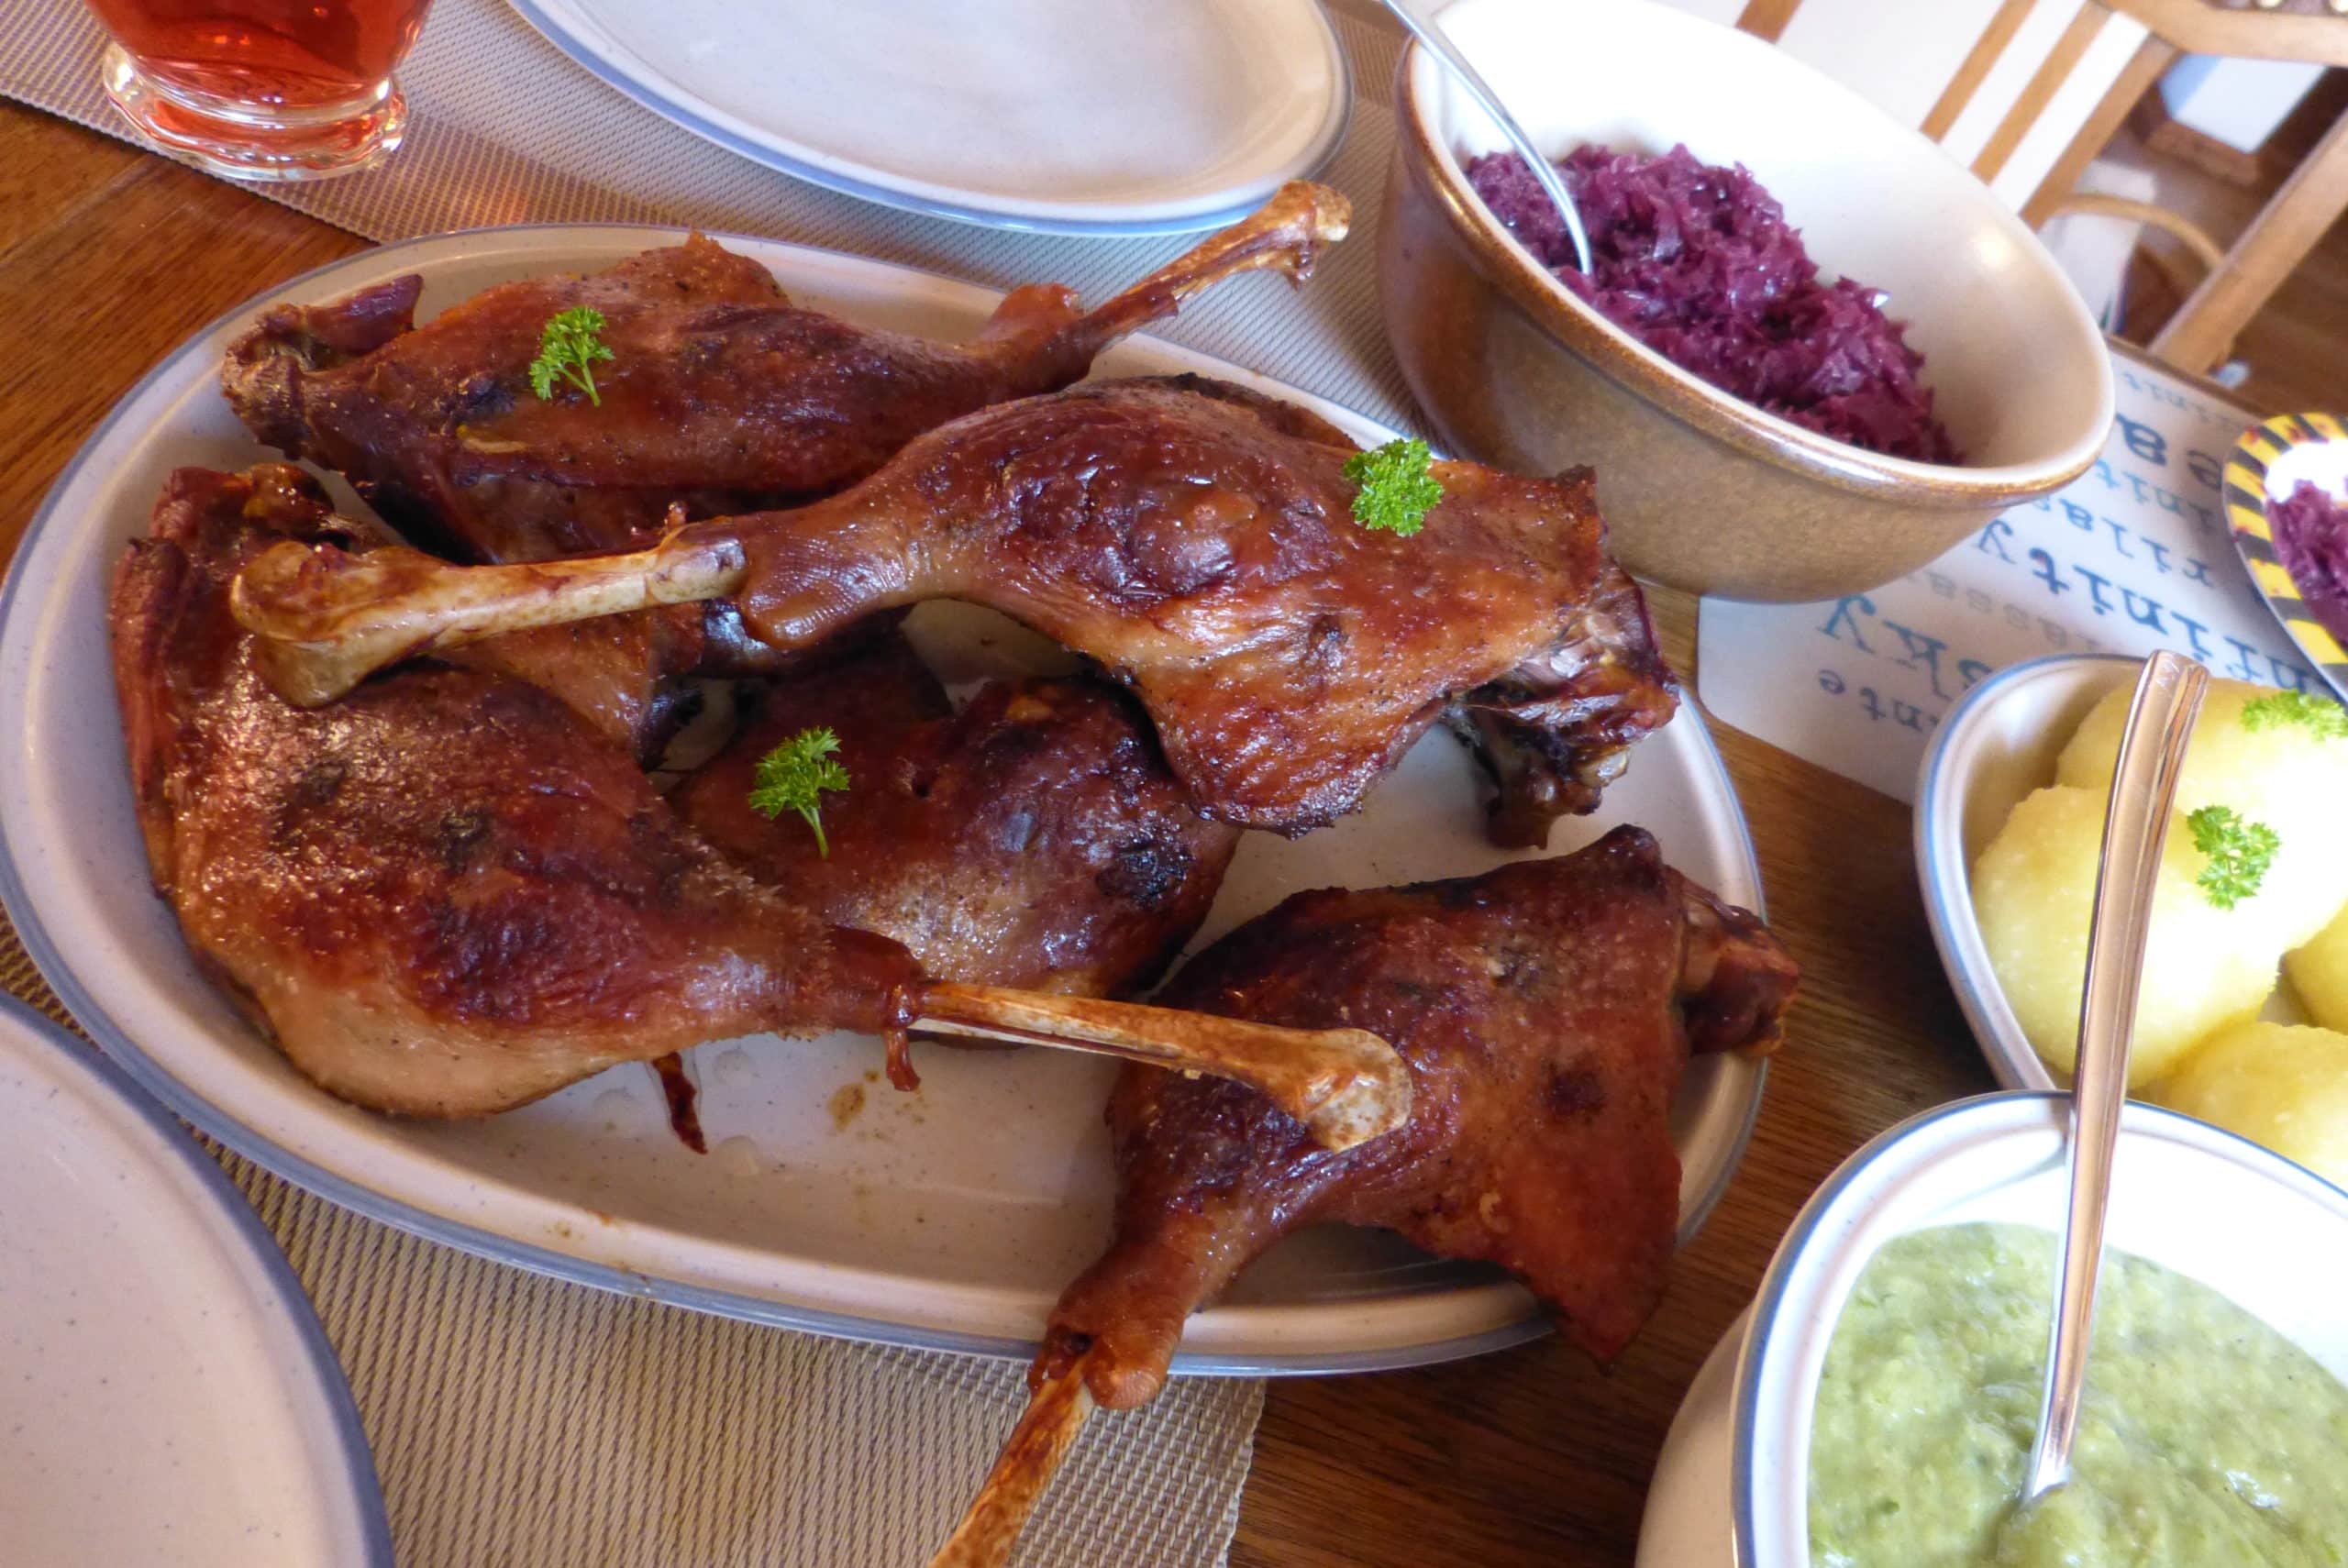 Beautifully golden brown German roasted goose legs on a platter, accompanied by a plate of potato dumplings, a bowl of savoy cabbage (Wirsing), and a bowl of blaukraut.